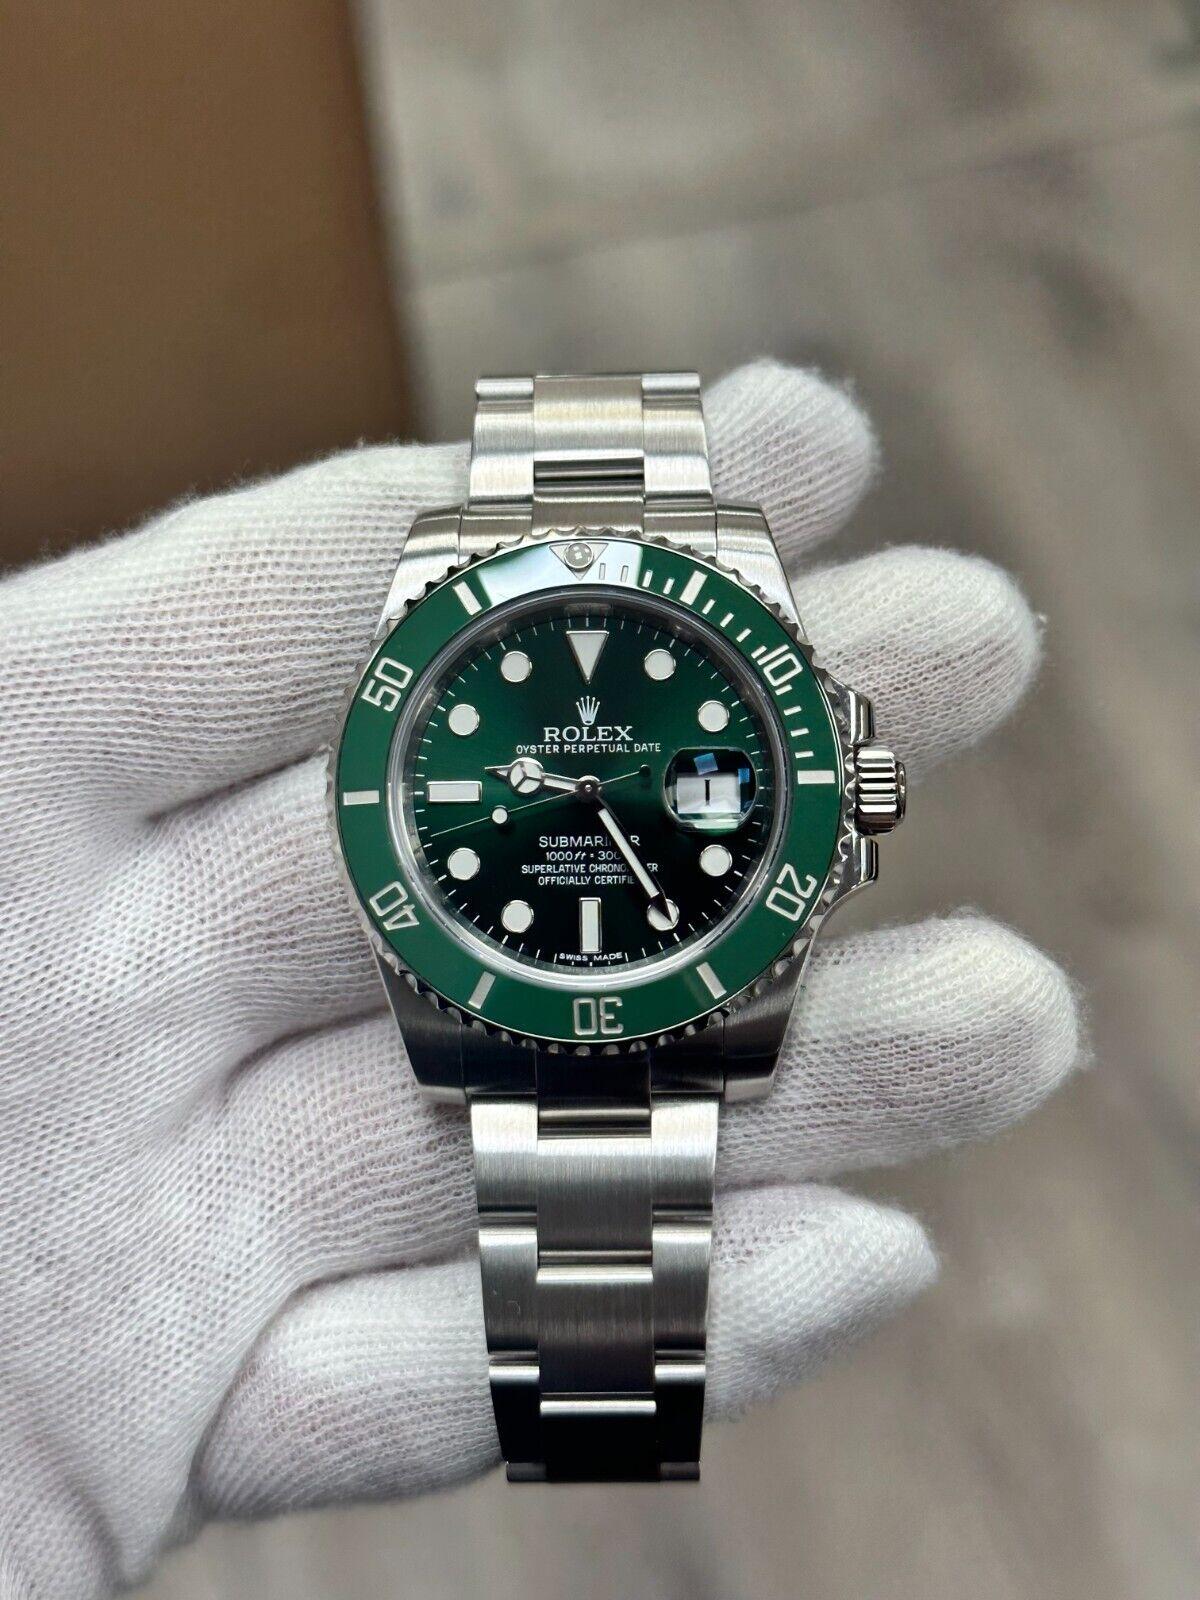 Style Number: 116610LV

Serial: 3452Z***

Year: 2010-2020
 
Model: Submariner 